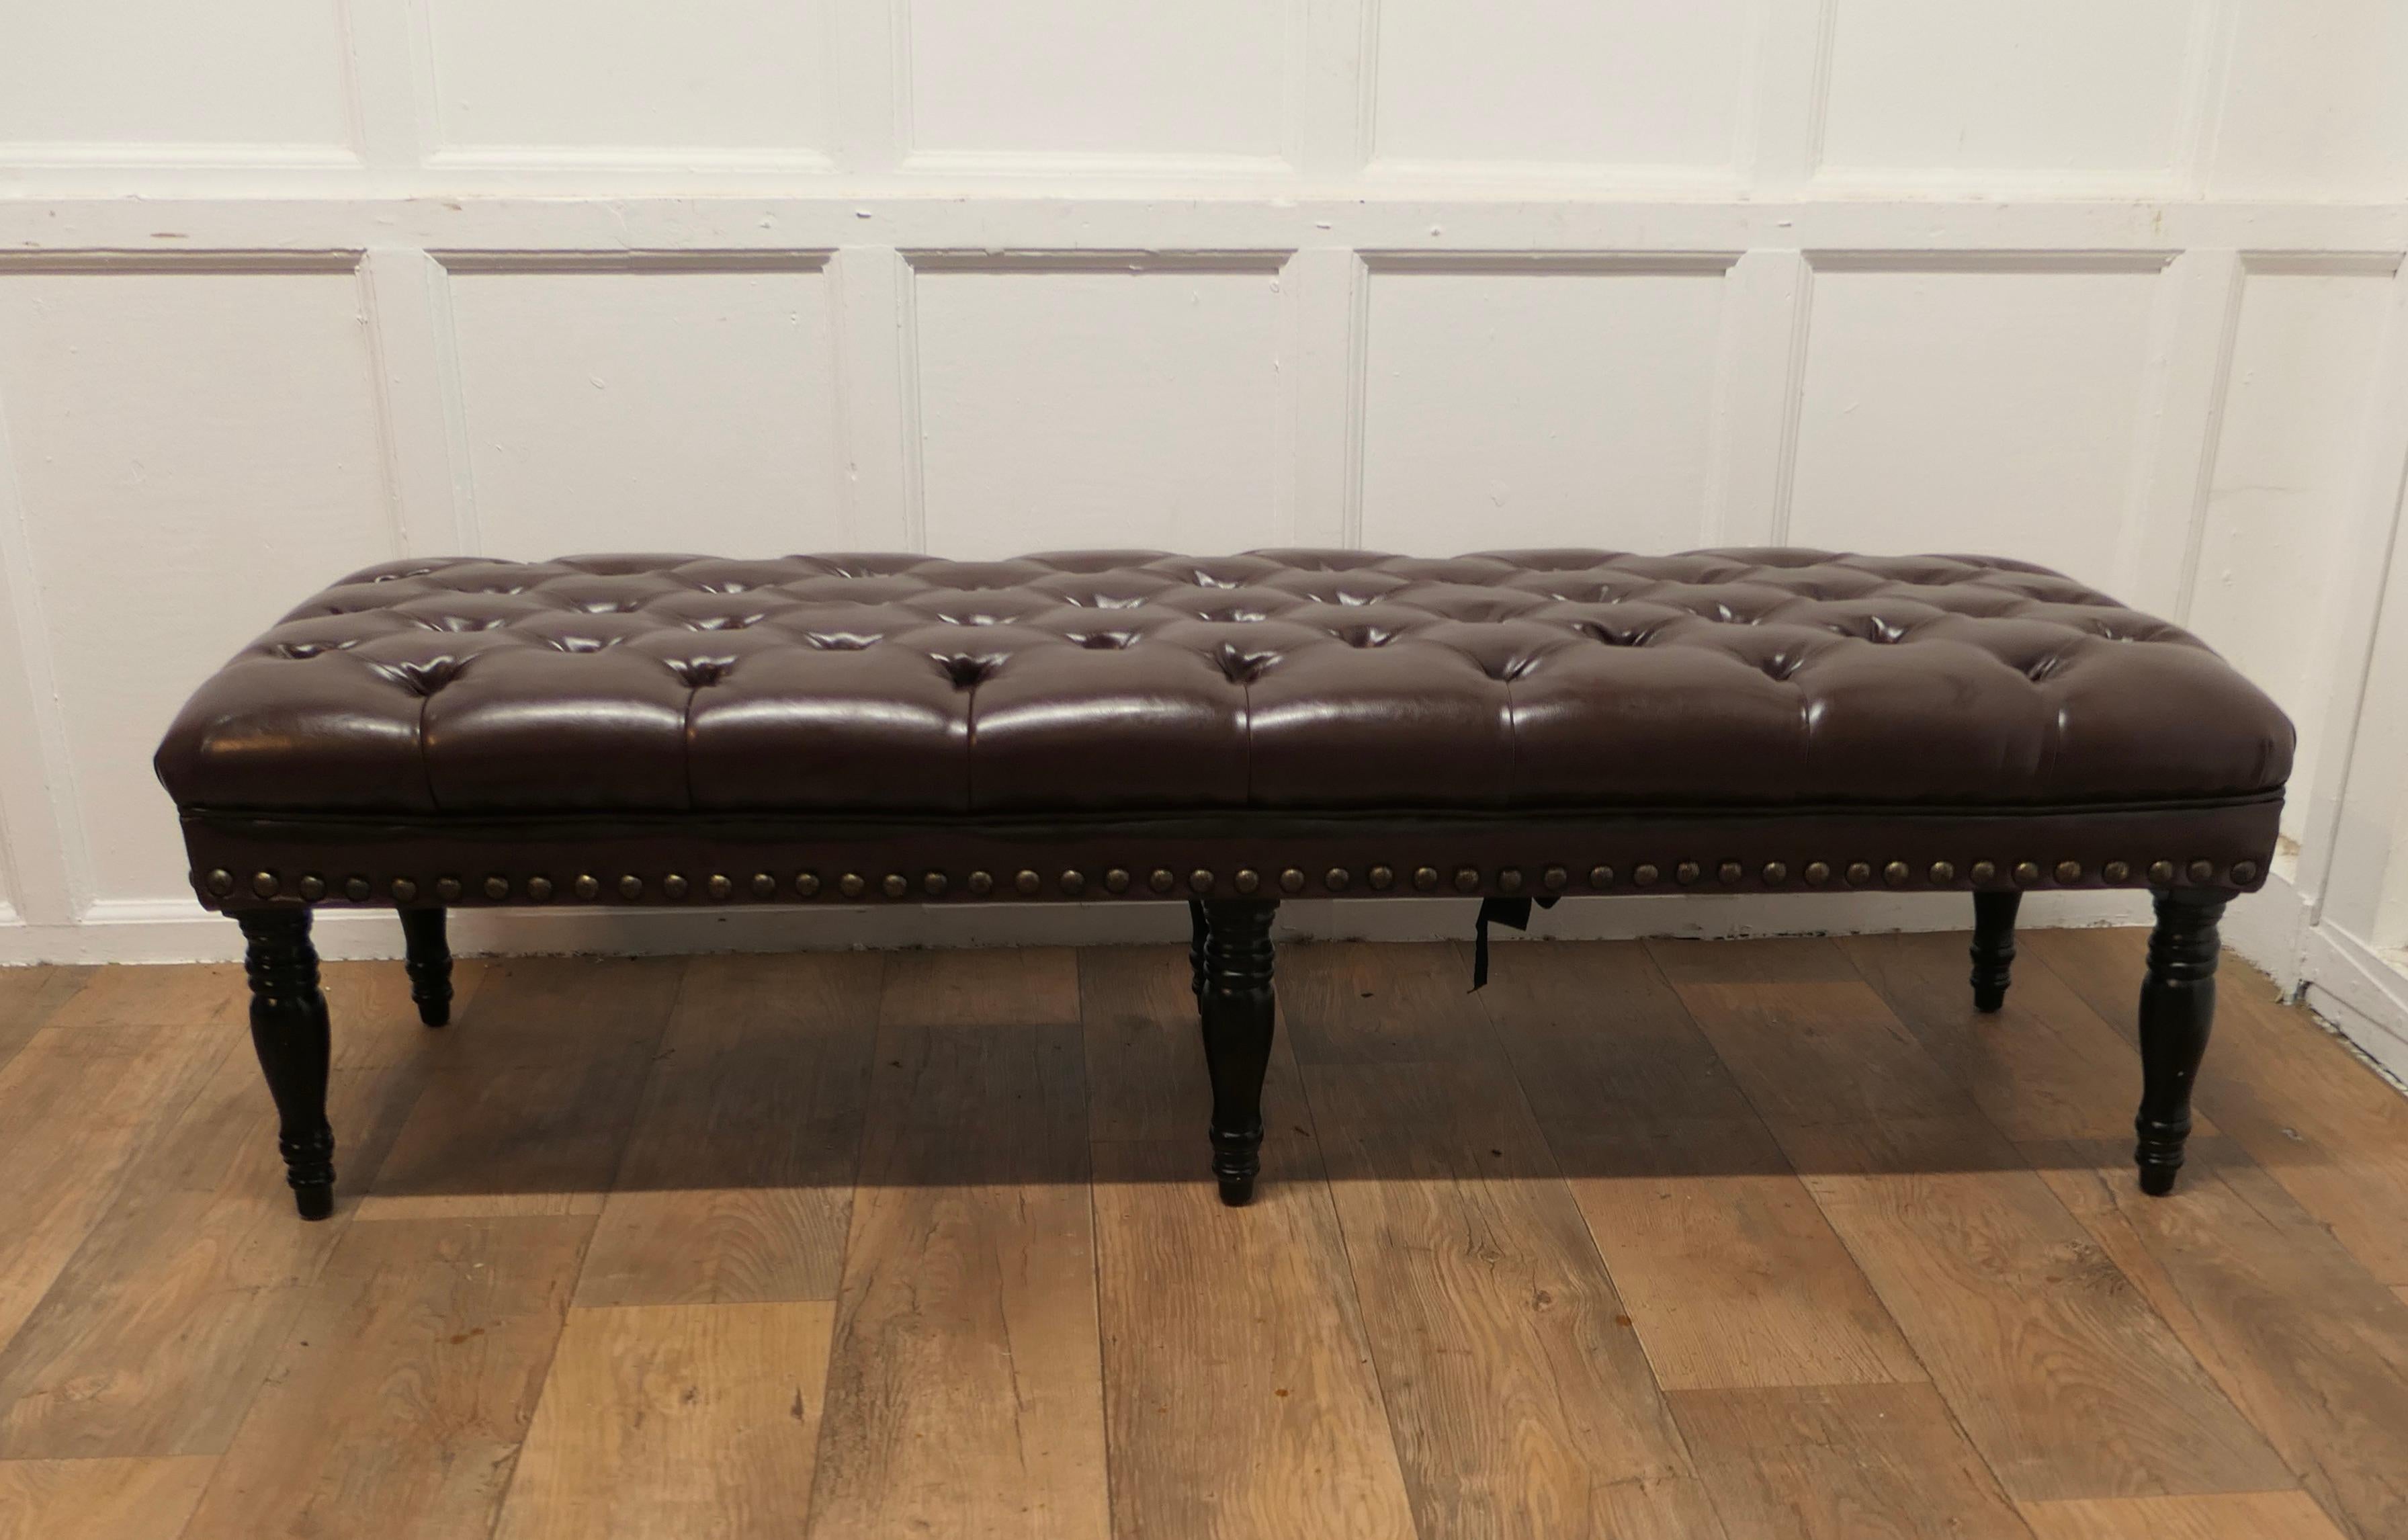 Leather Chesterfield Long Hearth Stool or Window Seat

This delightful piece is upholstered in brown leather, the leather is very thick  heavy quality and is very soft and pliable, it is set on turned legs. 
This is a beautiful piece of country